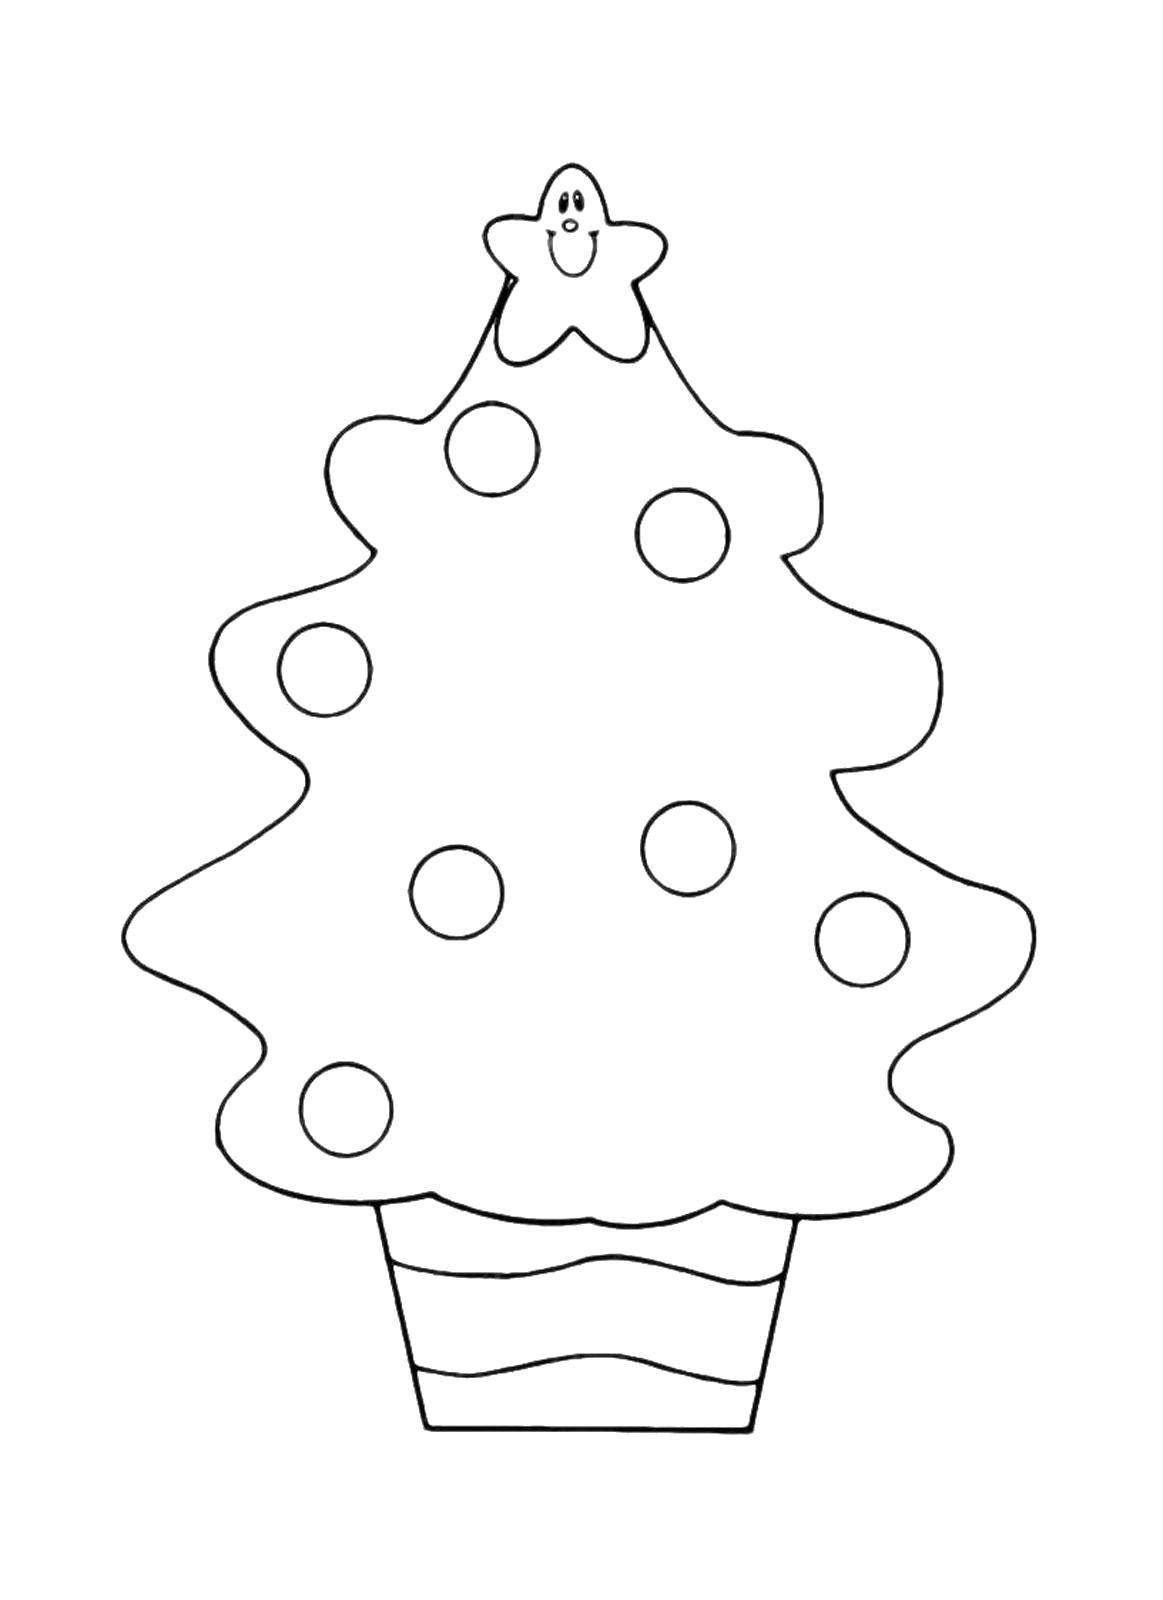 Coloring Sweetheart tree. Category coloring Christmas tree. Tags:  New Year, tree, gifts, toys.